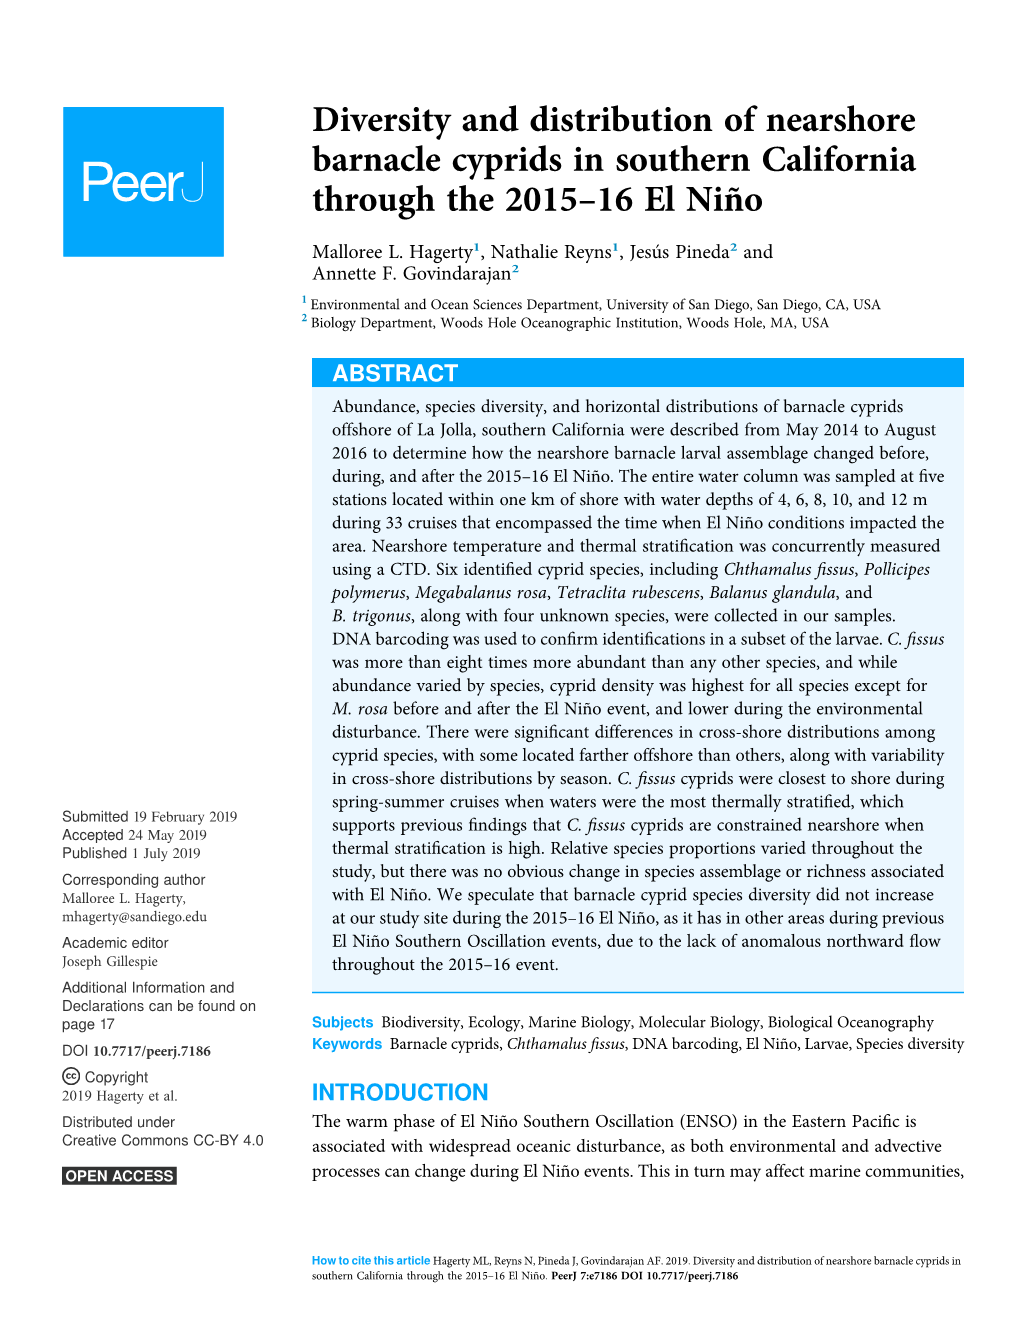 Diversity and Distribution of Nearshore Barnacle Cyprids in Southern California Through the 2015–16 El Niño